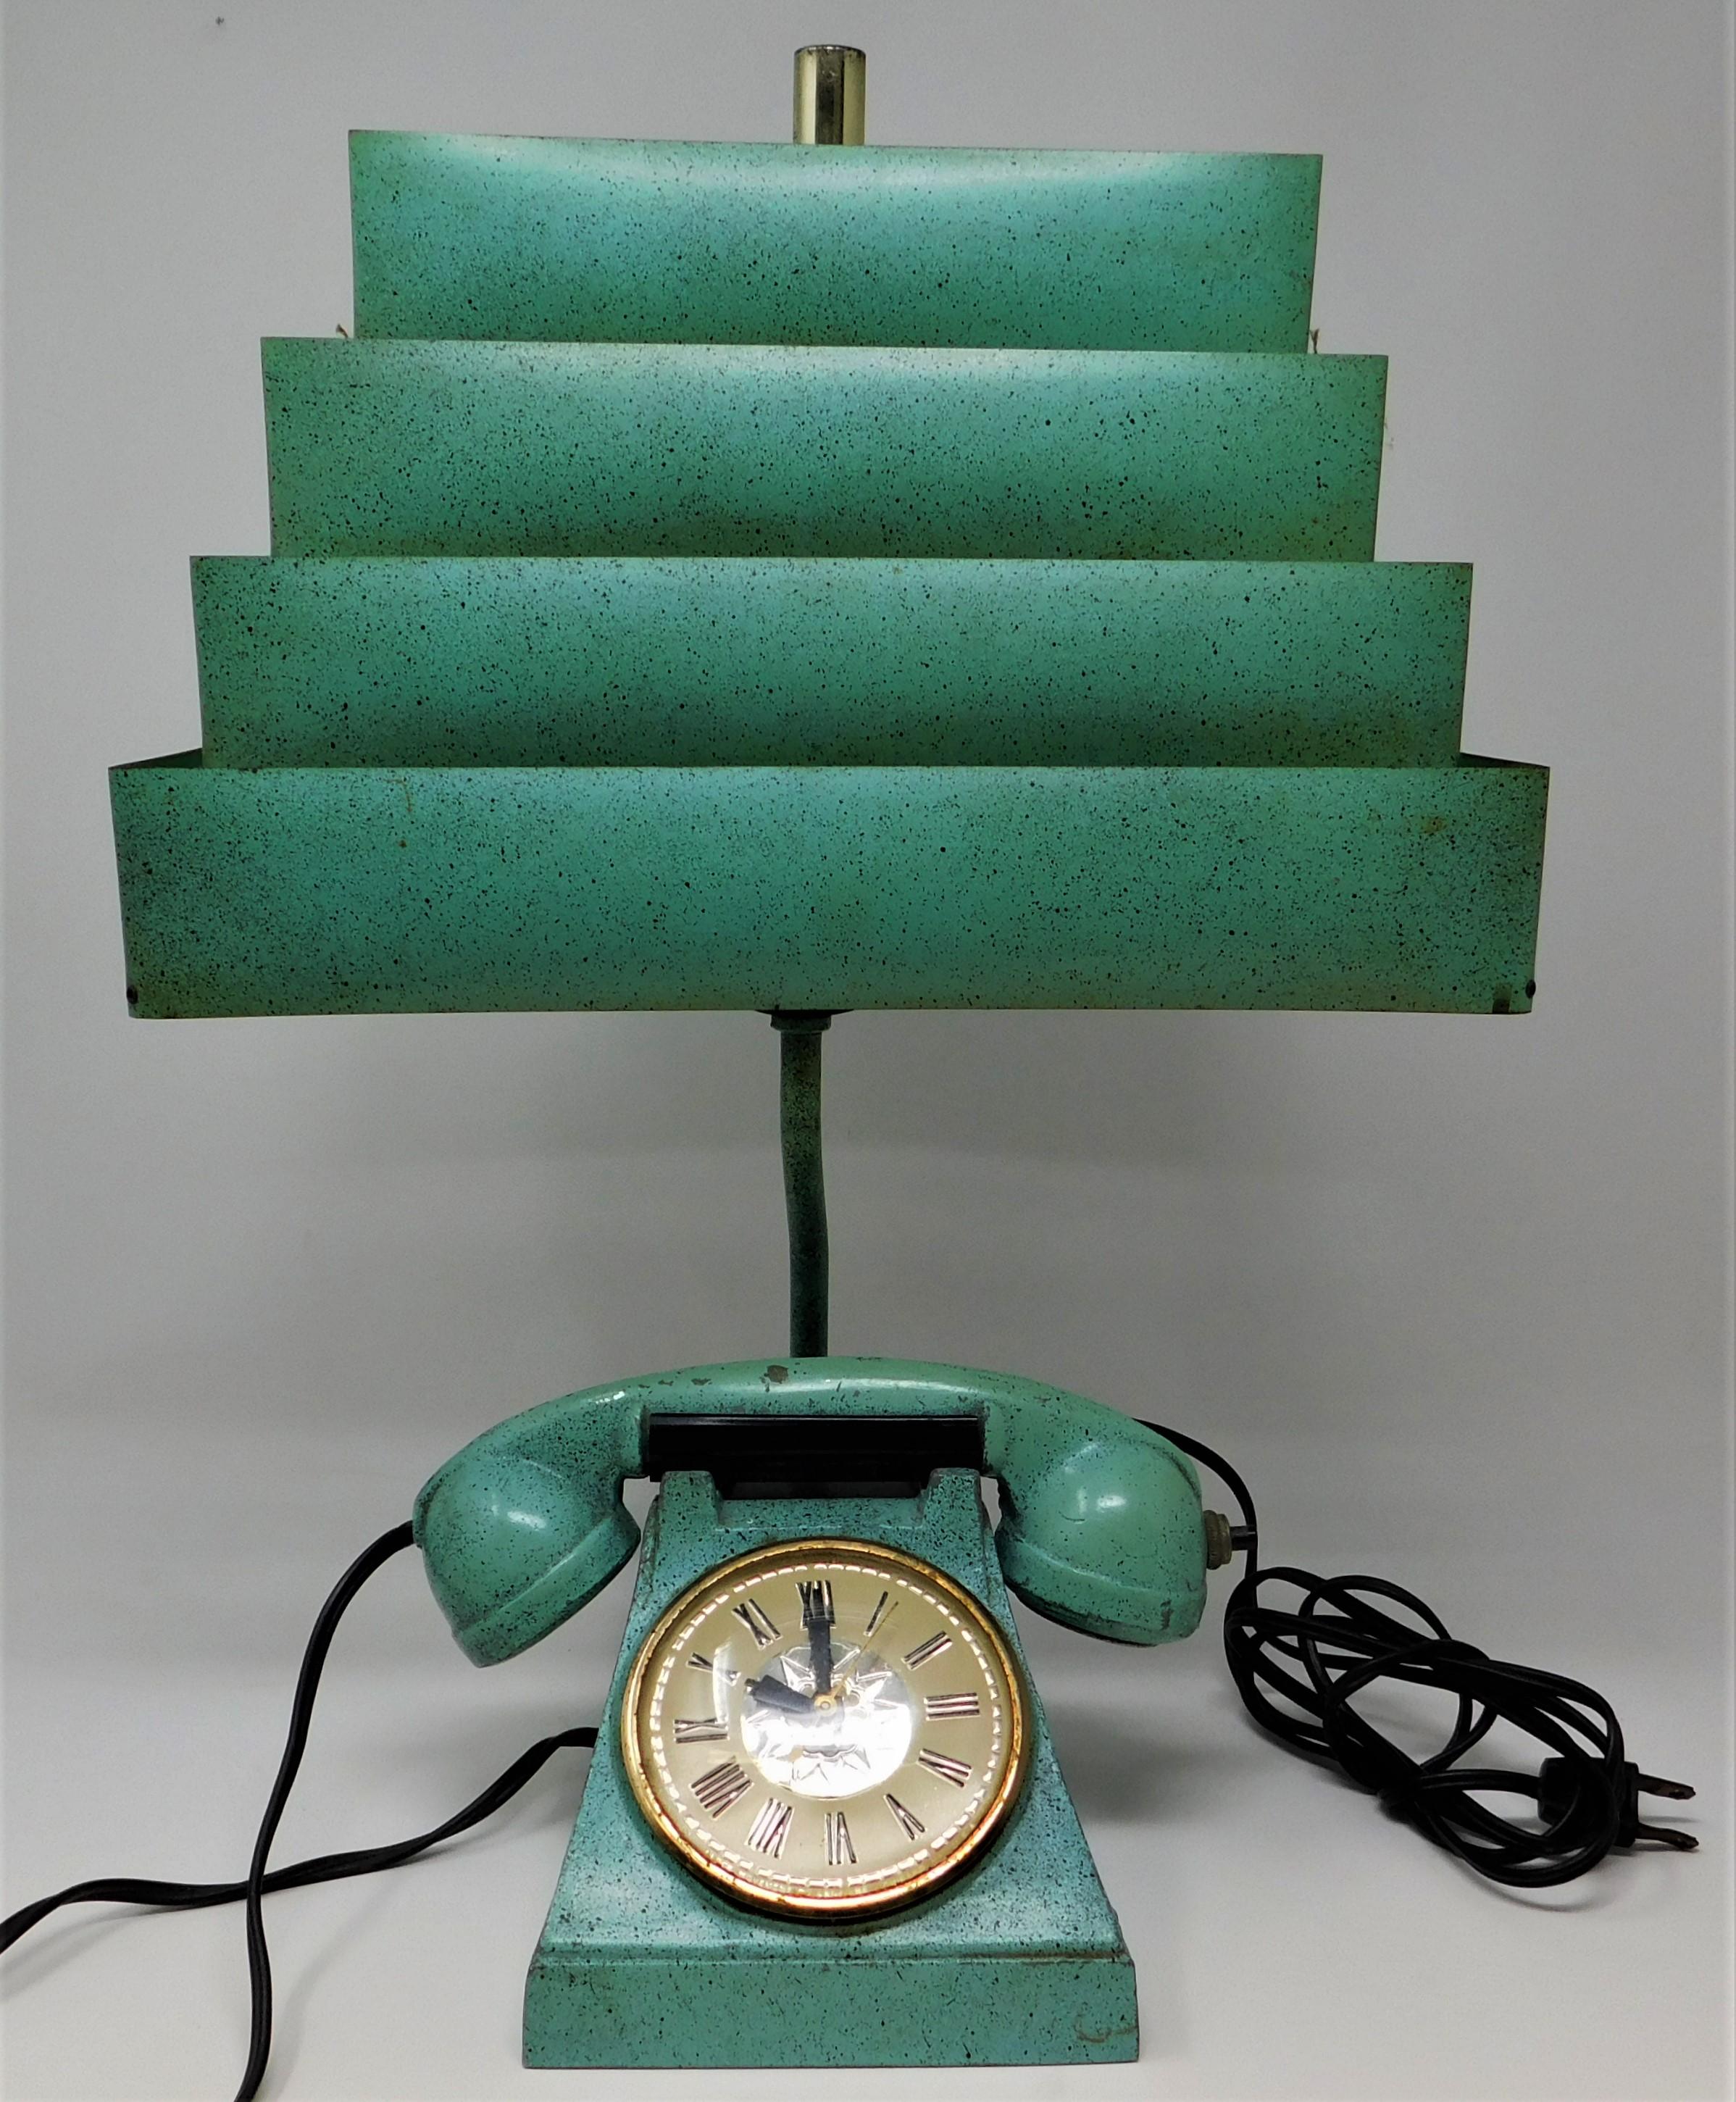 Rare Mid-Century Modern late 1940s or early 1950s retro kitsch décor vintage lamp with multiple personalities, it looks like a telephone, but it's really a table/desk clock and a cigarette/cigar lighter. All topped off with a super cool Venetian